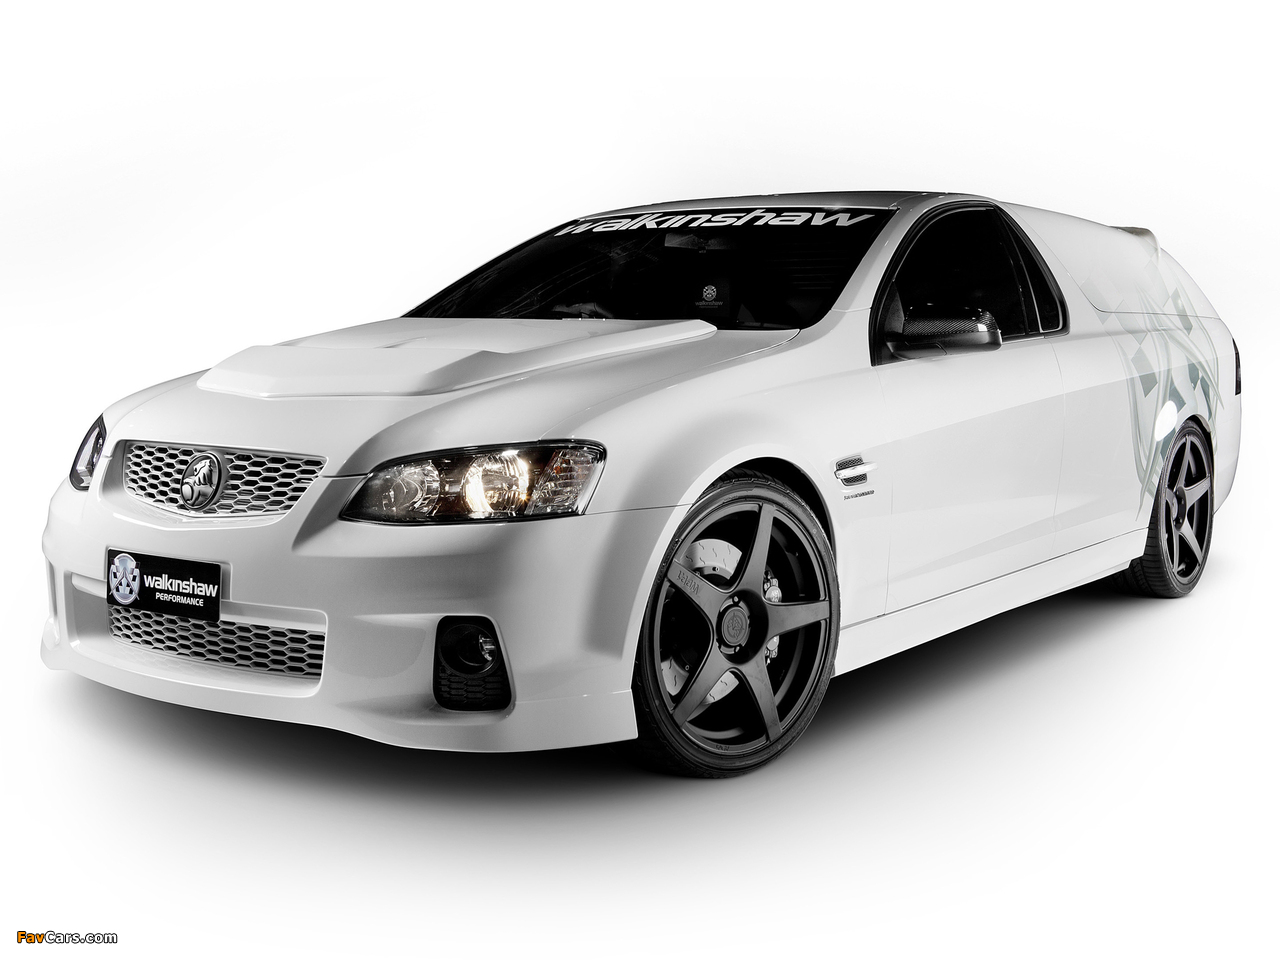 Walkinshaw Performance Holden Commodore SuperUte (VE) 2011 photos (1280 x 960)